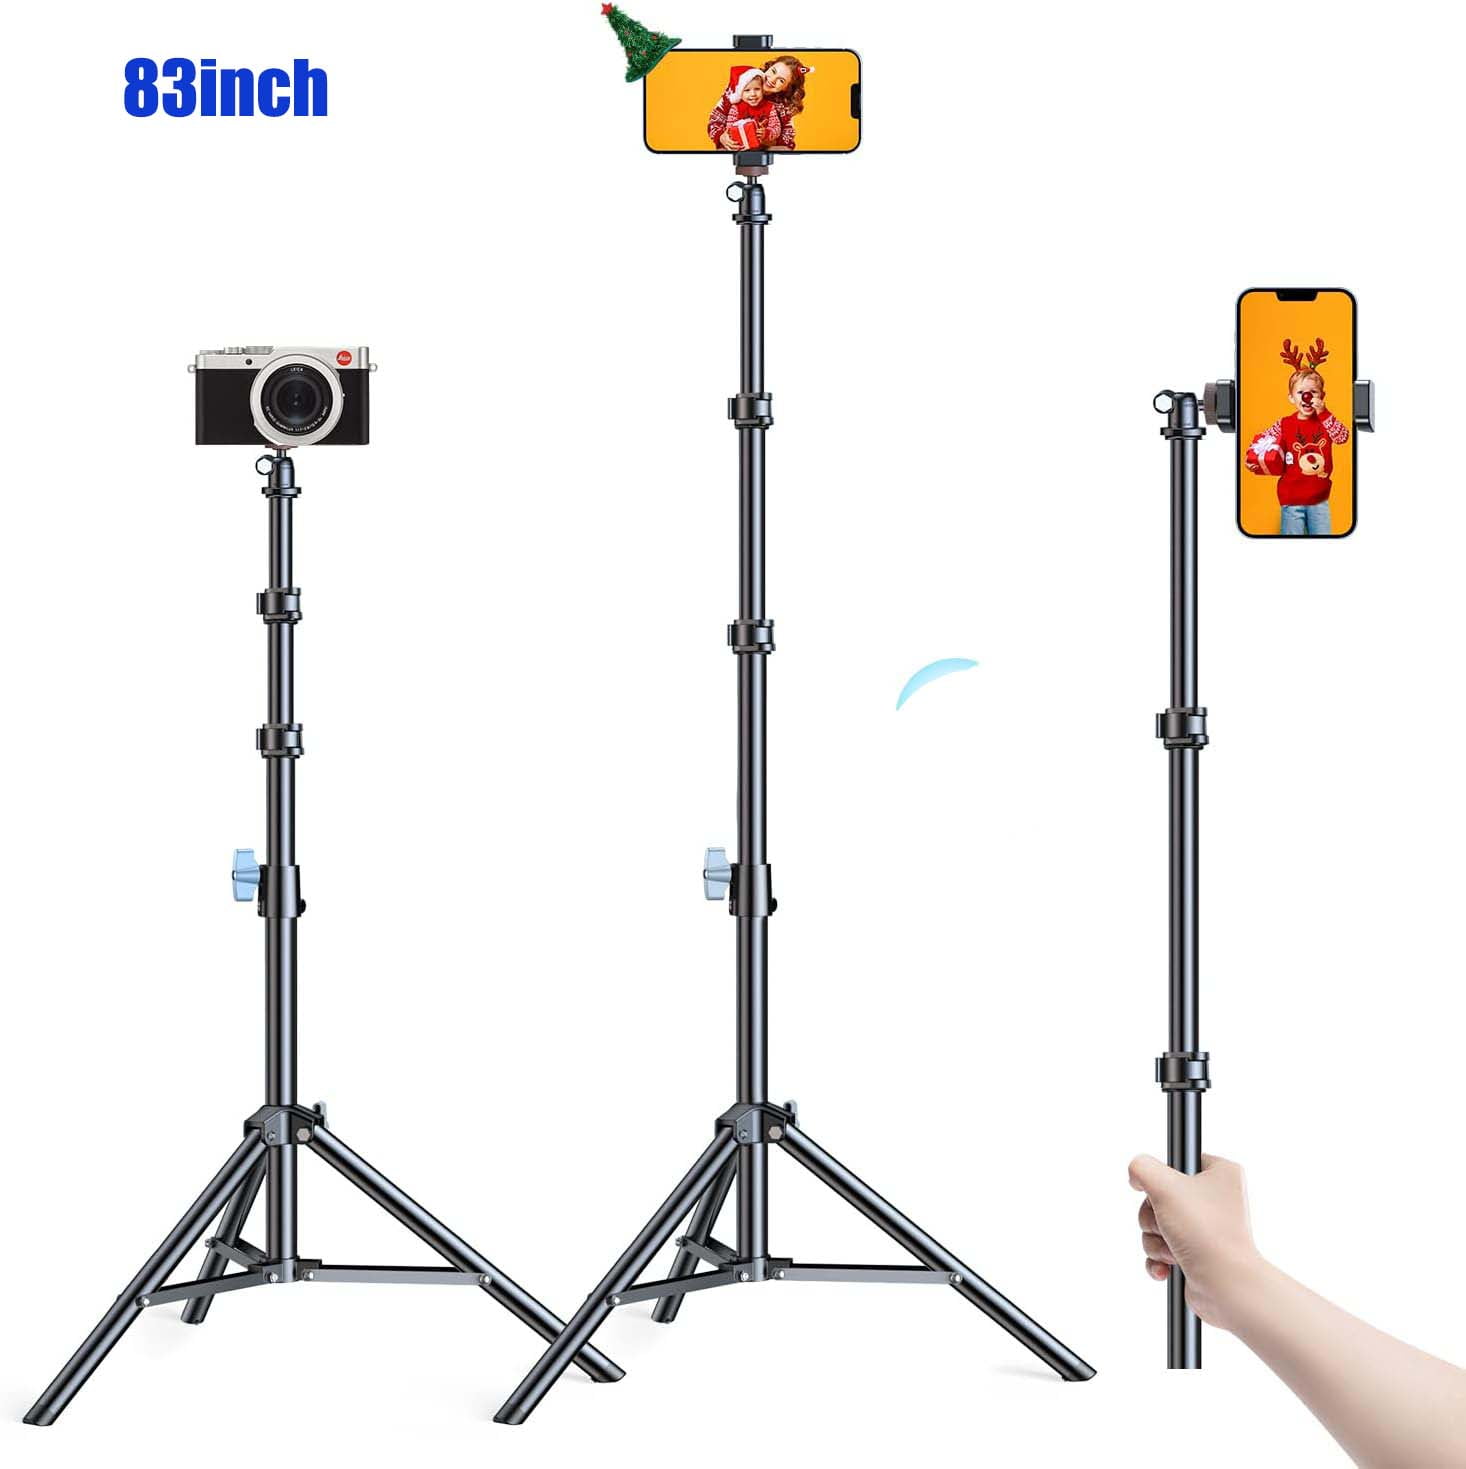 Flexible Webcam Stand and Cell Phone Tripod with Holder for Logitech and  Nexigo Webcam, GoPro Camera and More. 